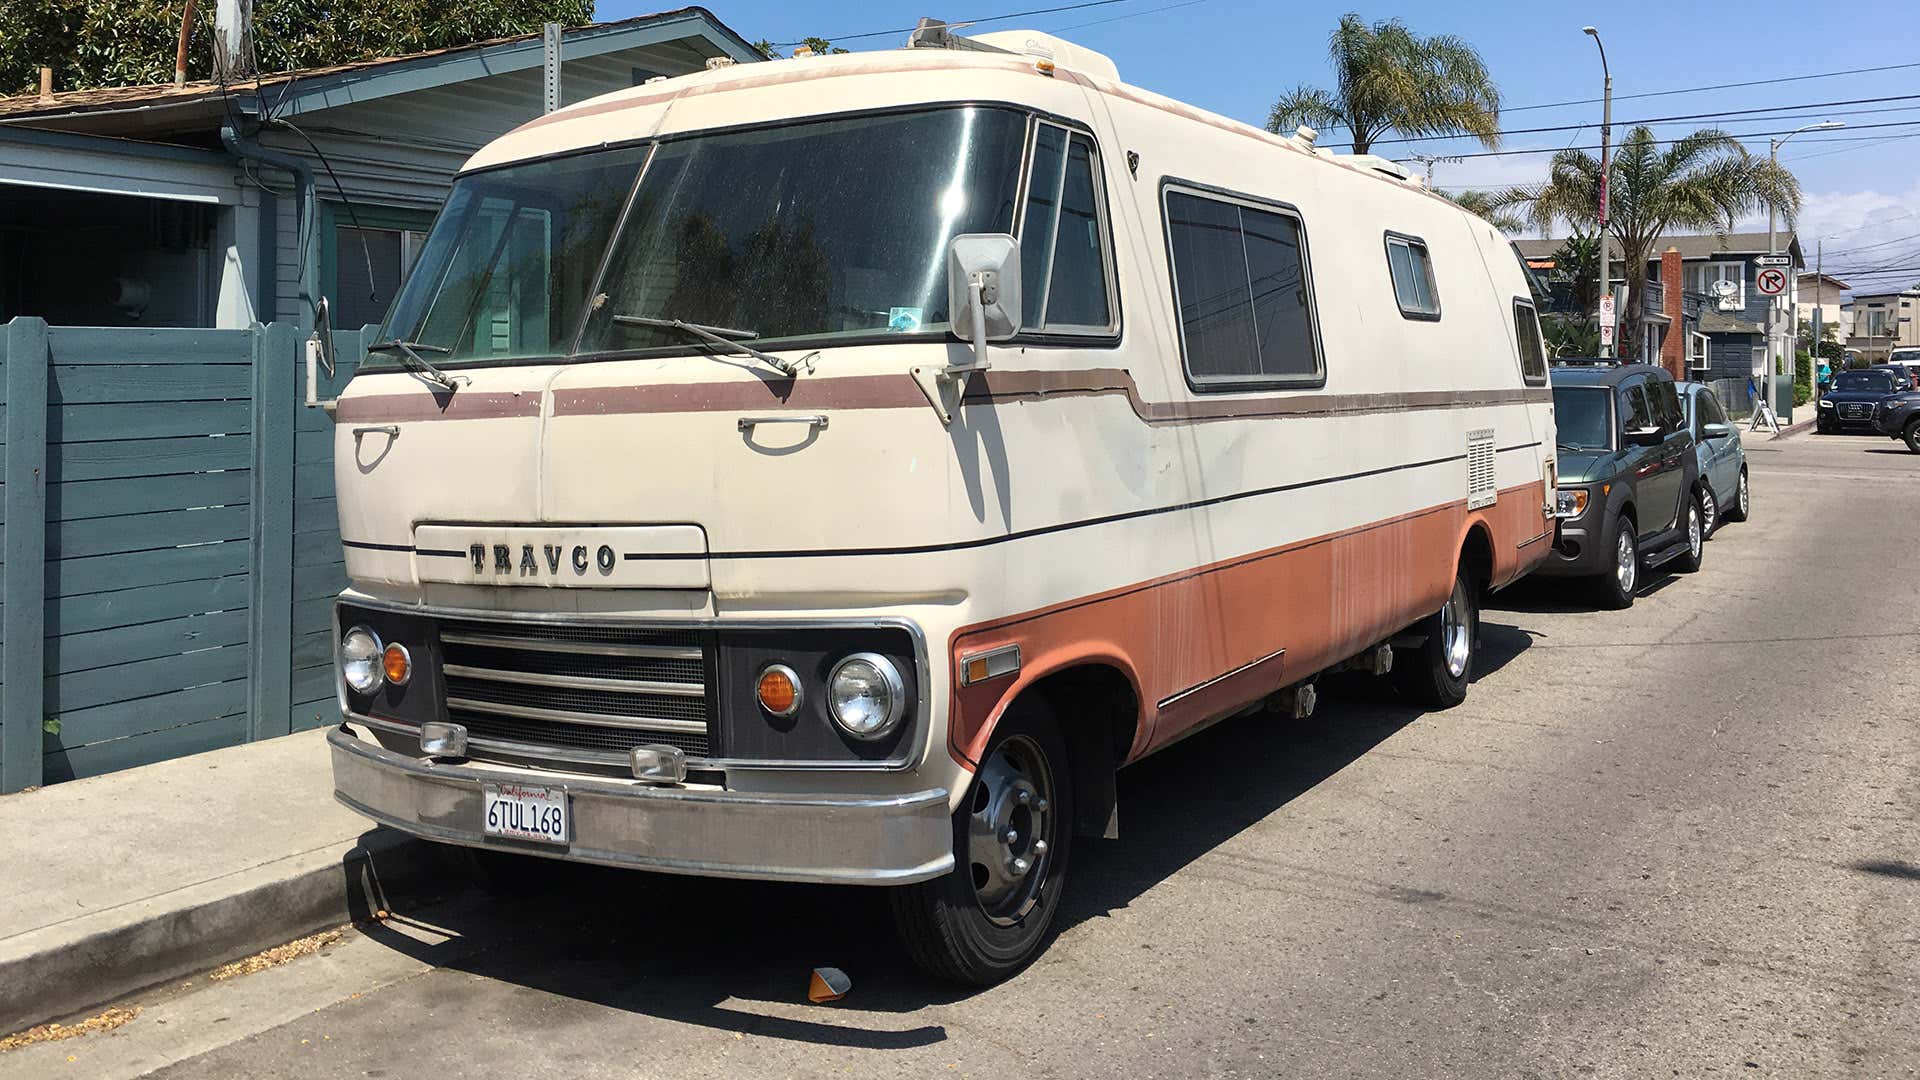 A Travco RV parked on the street.